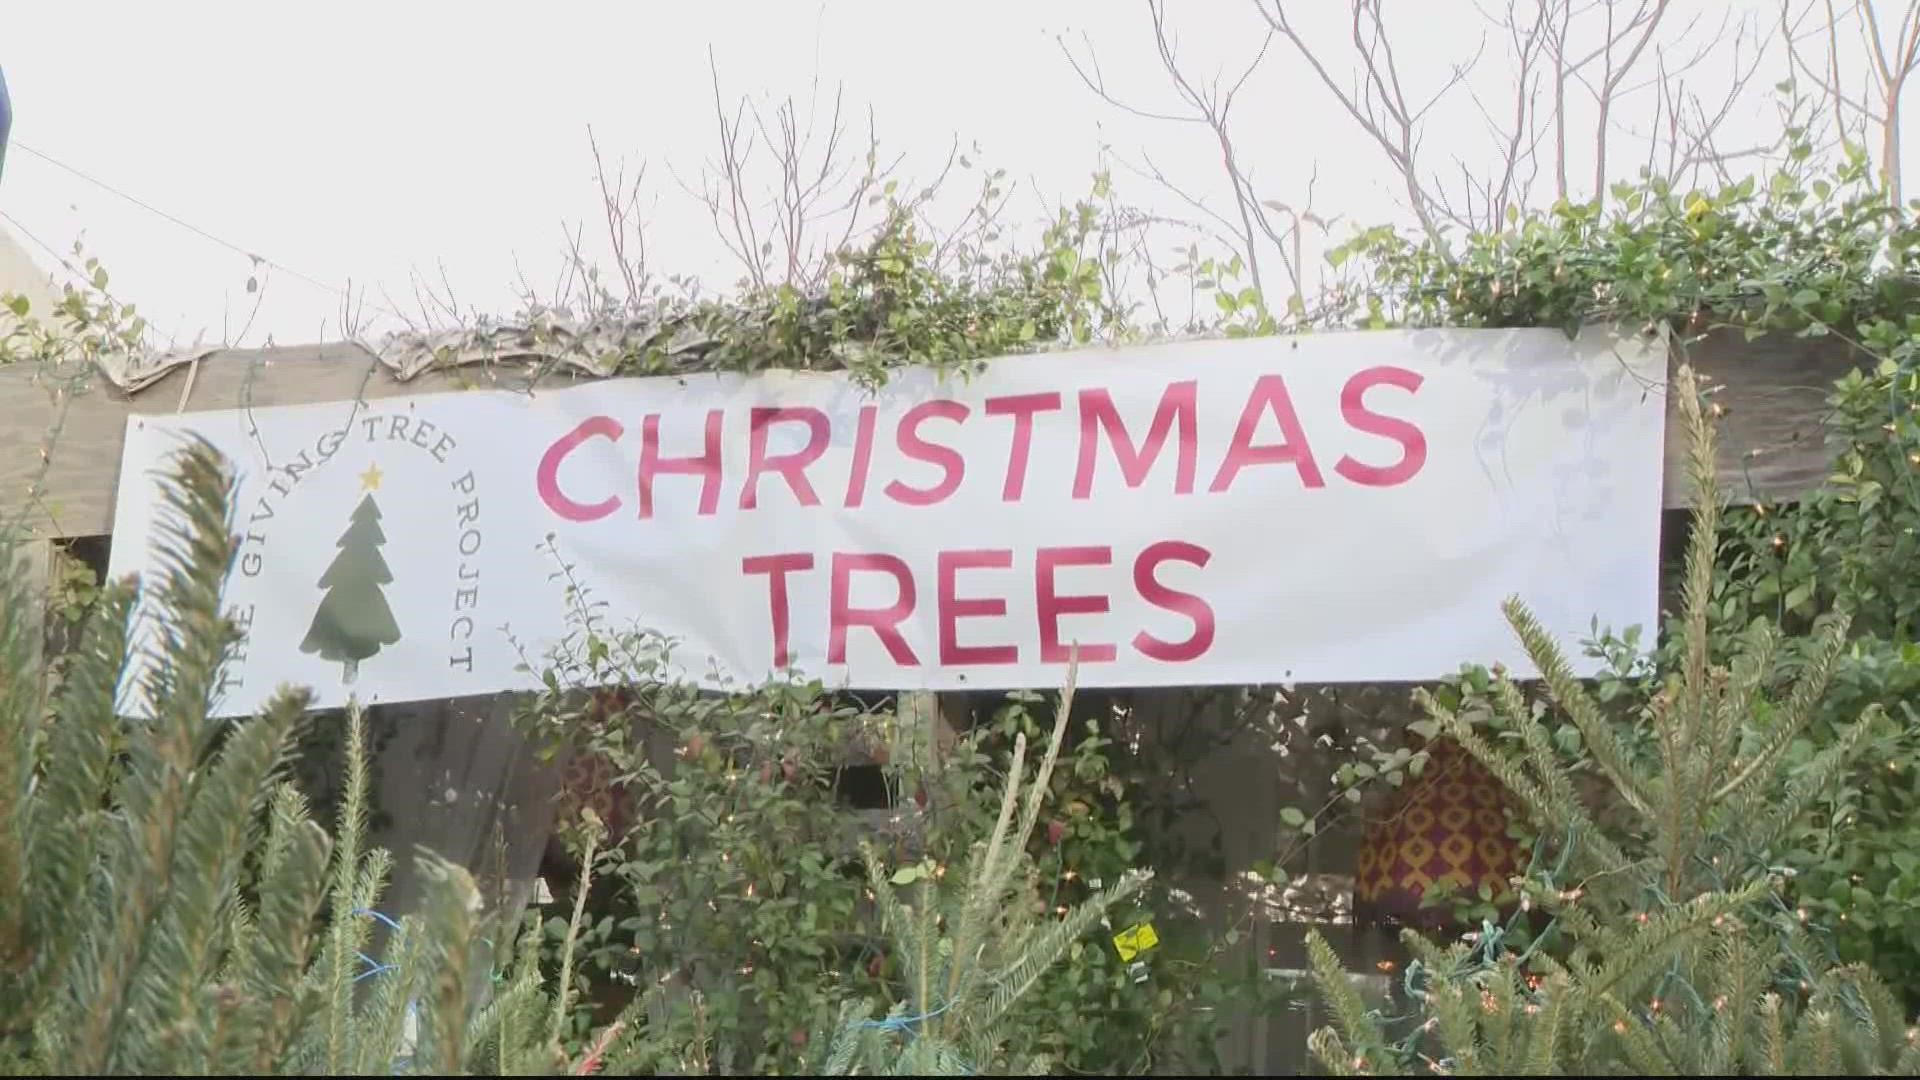 Ben Sherman of the Giving Tree Project talks to WUSA9 about the Christmas tree shortage. The charity aims to donate some proceeds to the H3 Project.